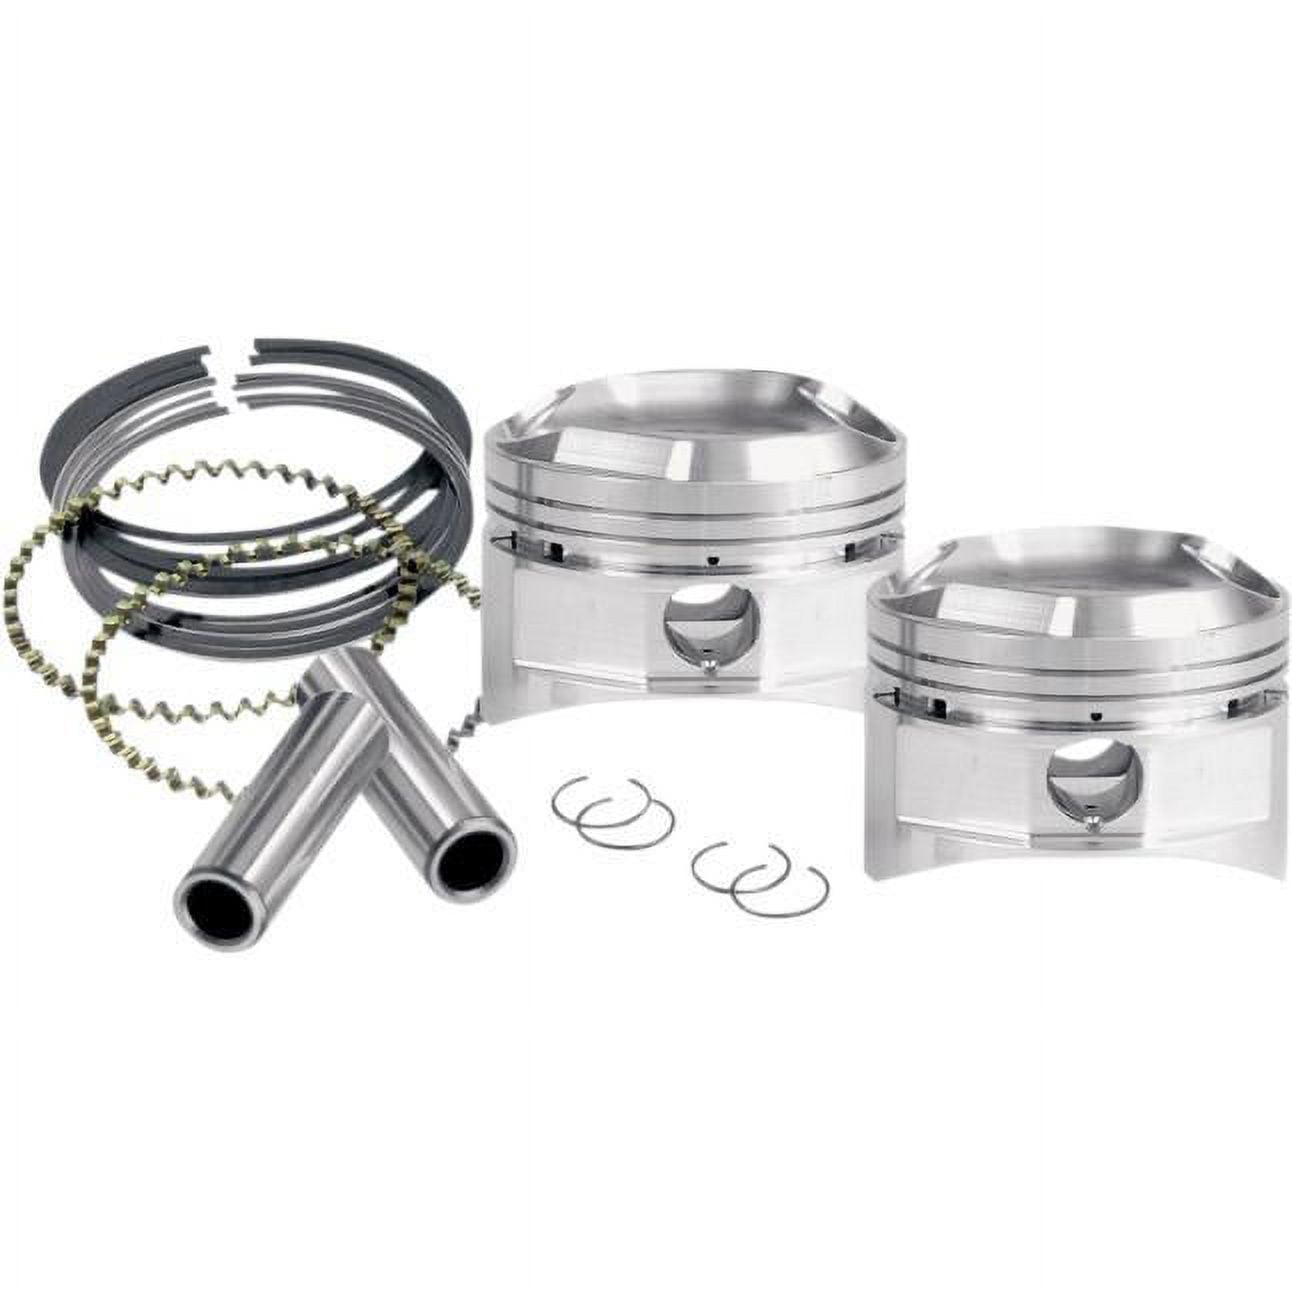 S&S Cycle Forged Piston Kit for 106ci. Cylinder Kit - Standard